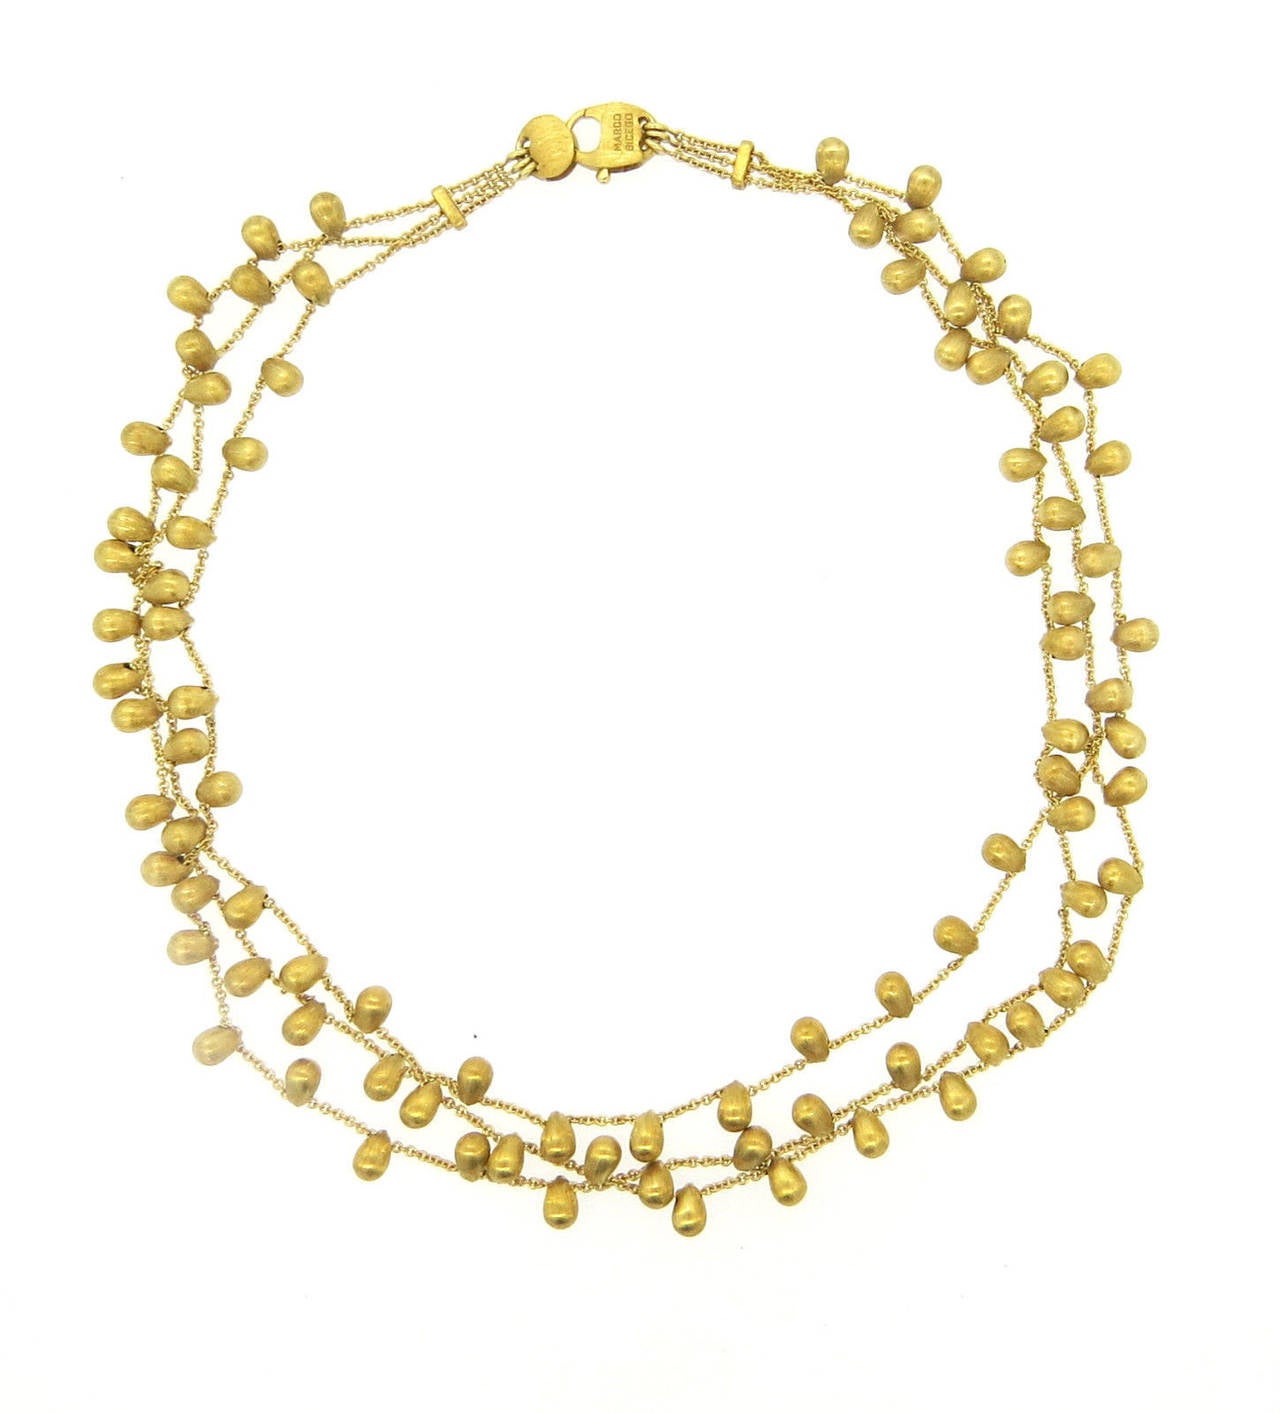 18k yellow gold three strand necklace, crafted by Marco Bicego for Acapulco collection. Necklace is 16